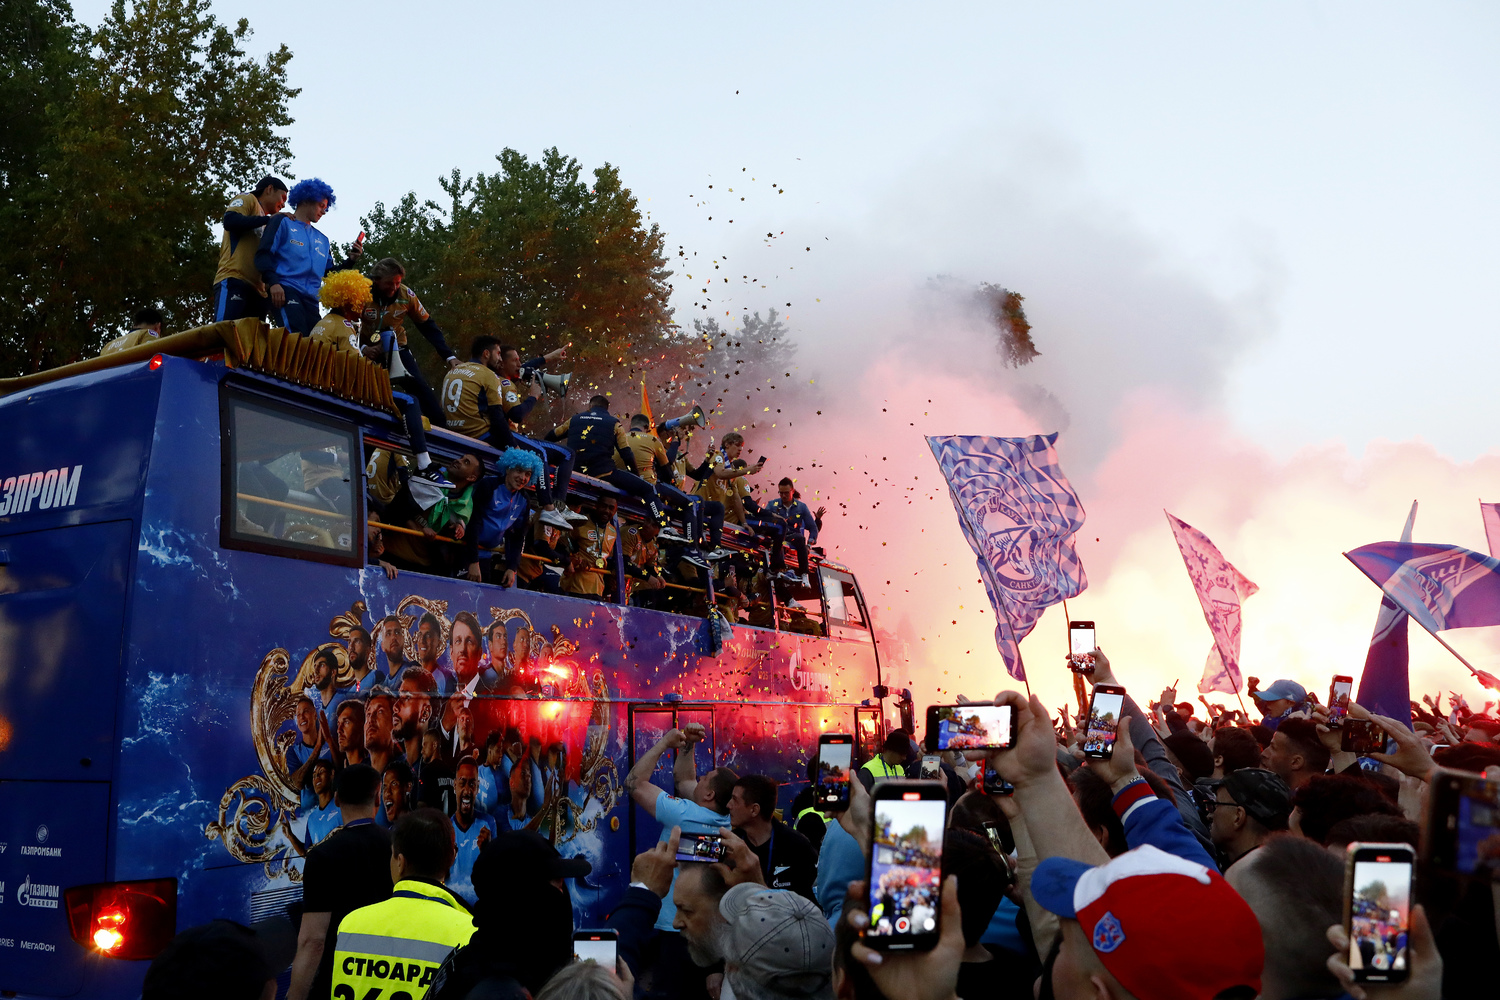 Fiery reception and fan love: how the Zenit championship parade took place in St. Petersburg  